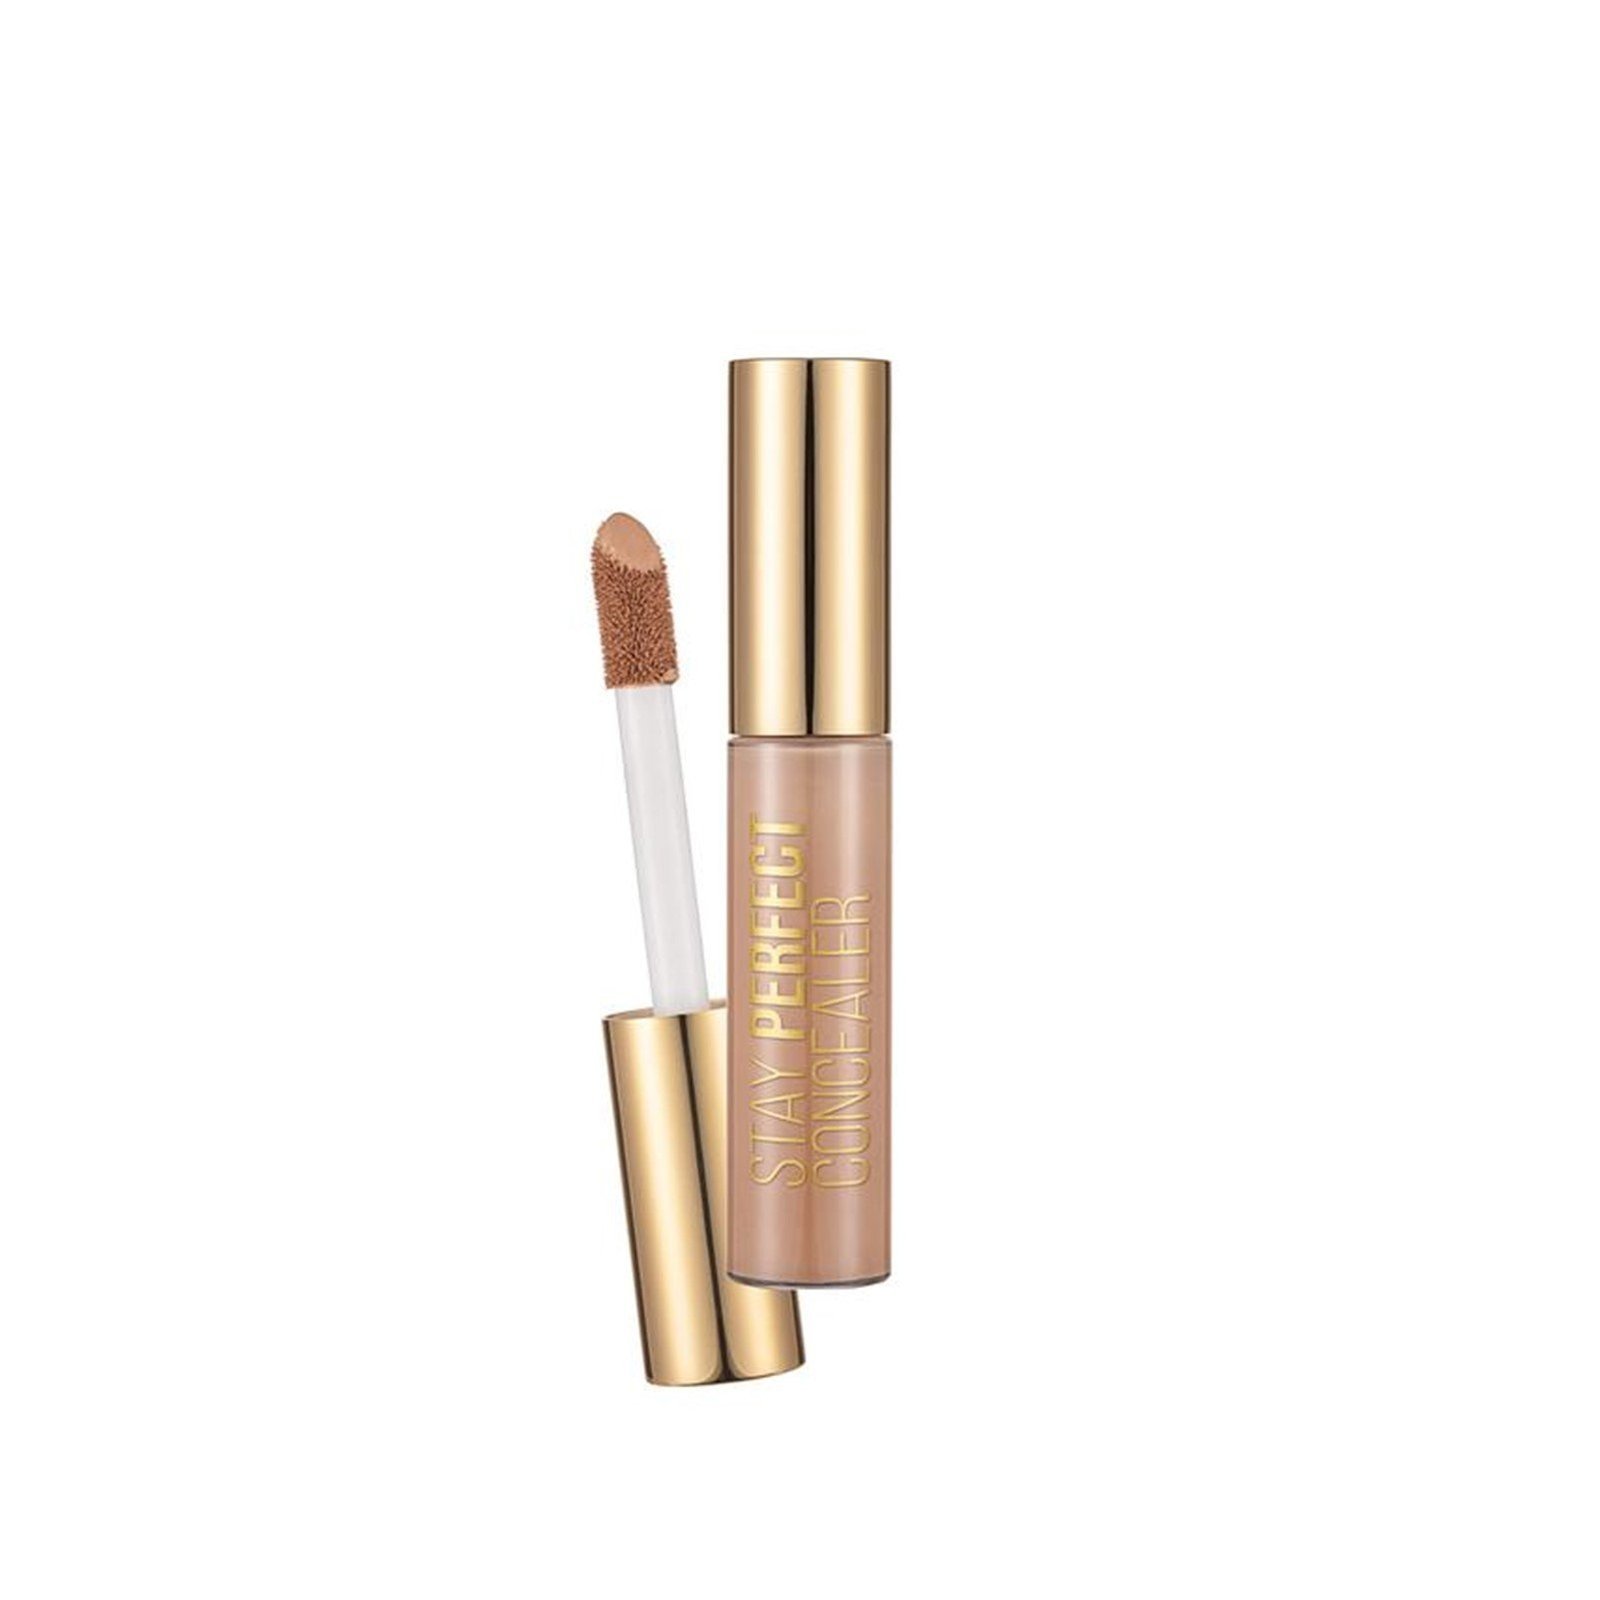 Pretty By Flormar Cover Up Liquid Concealer Soft Beige : Buy